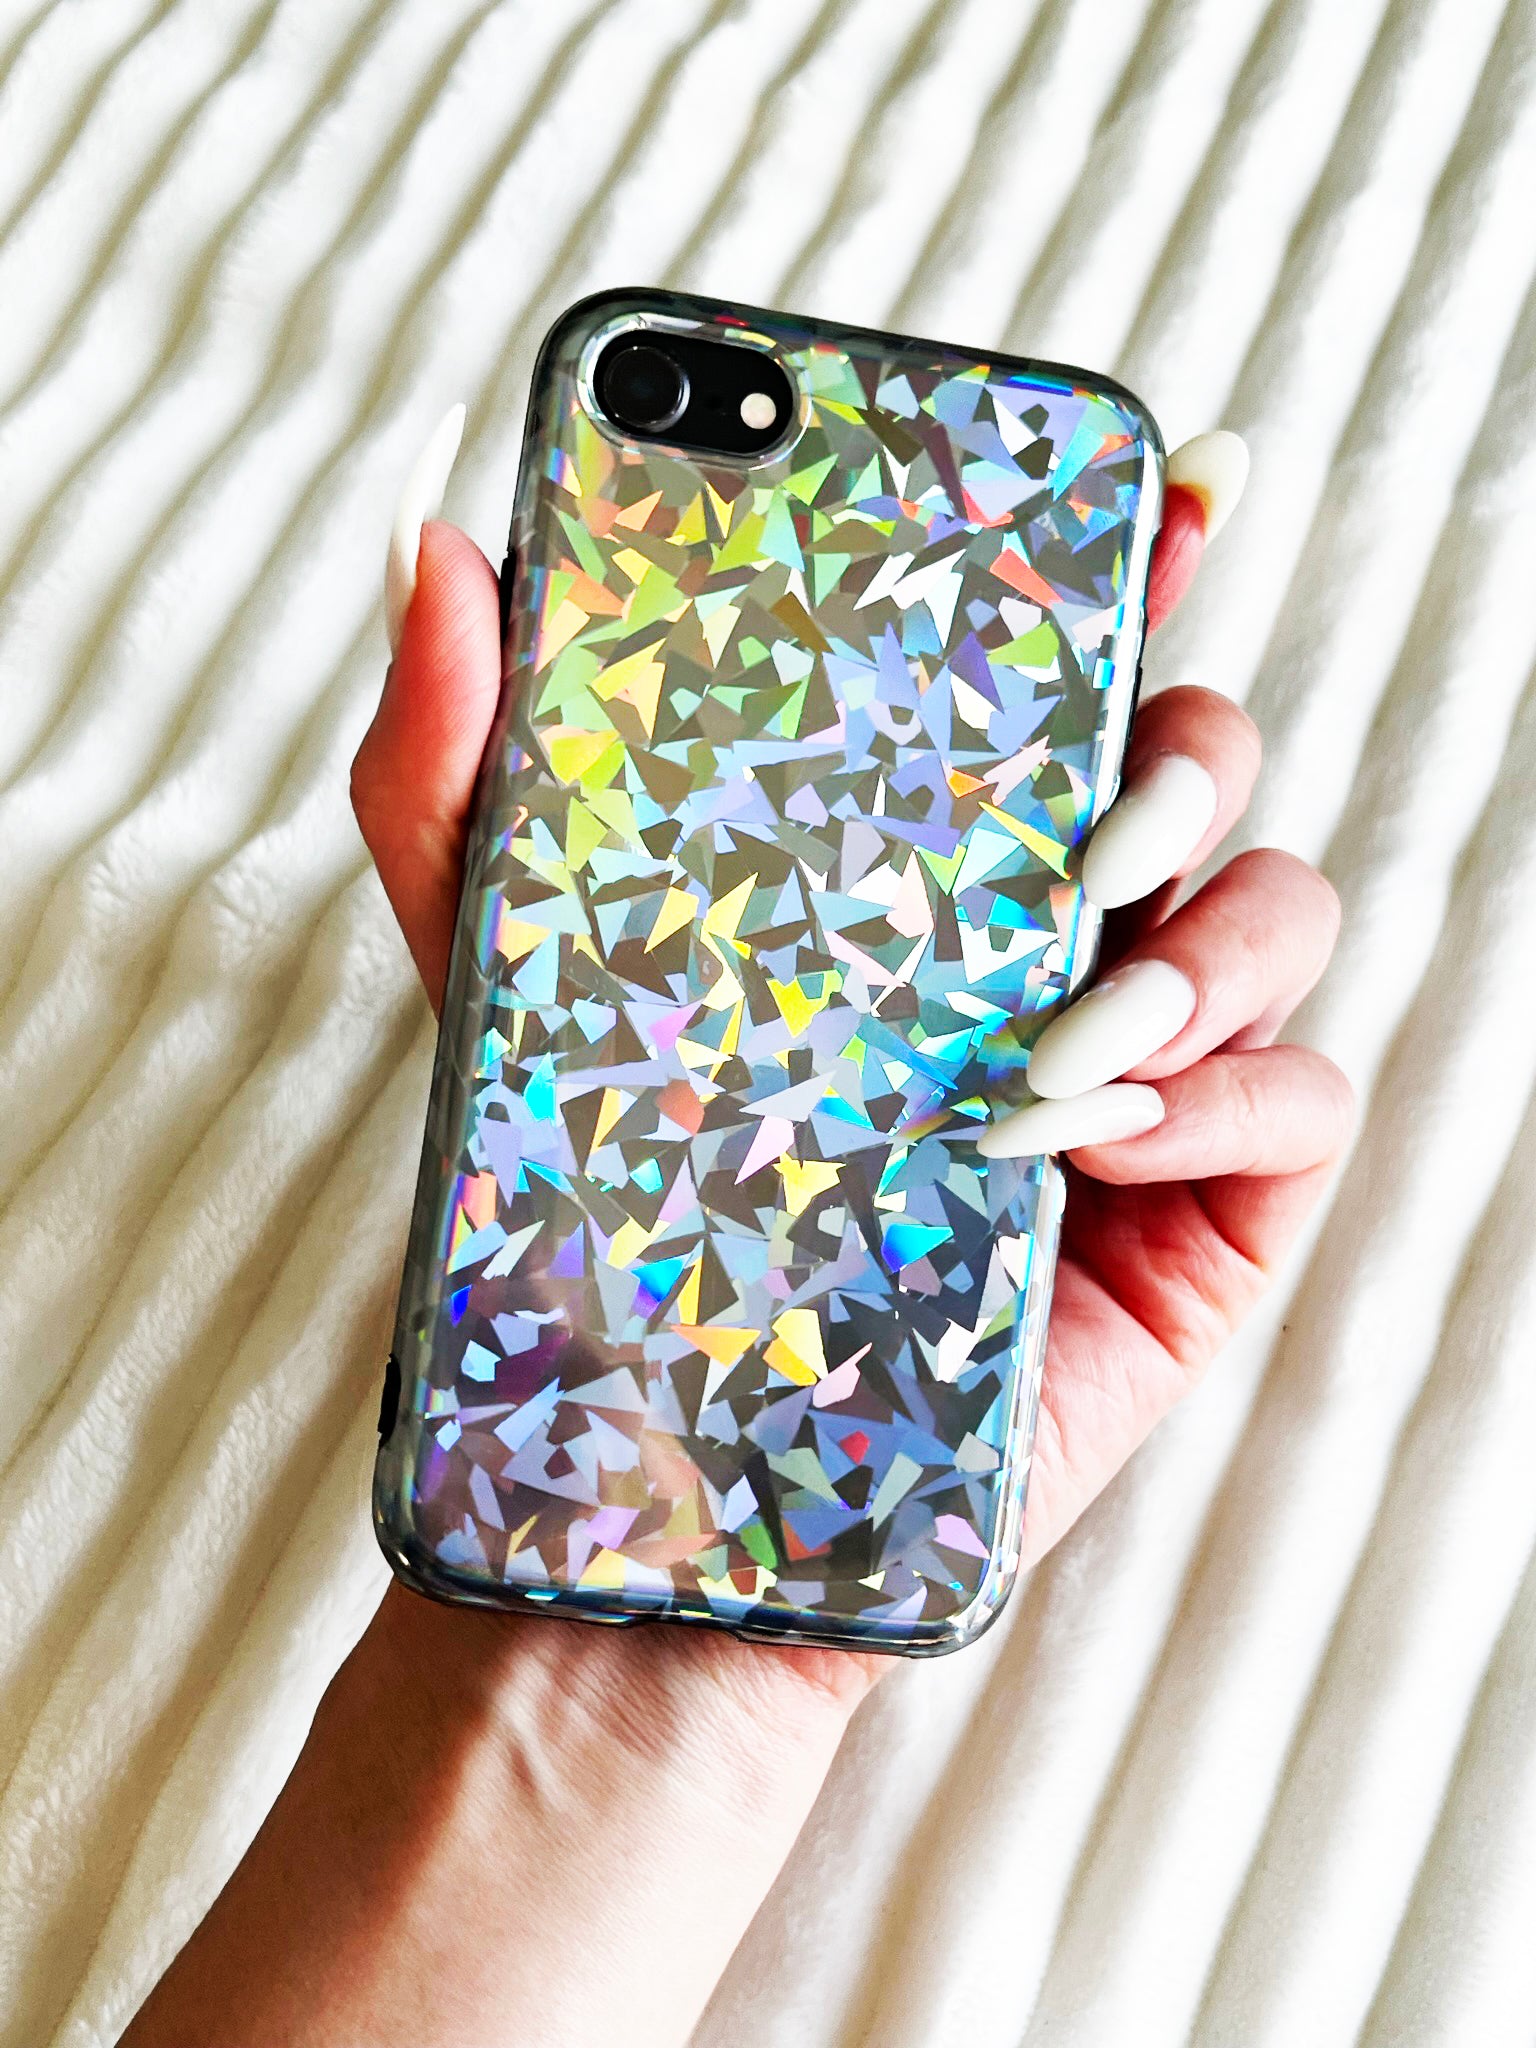 KokoLoveCo Laser Focus iPhone Case super shiny and colorful, on top of a white fluffy texture blanket